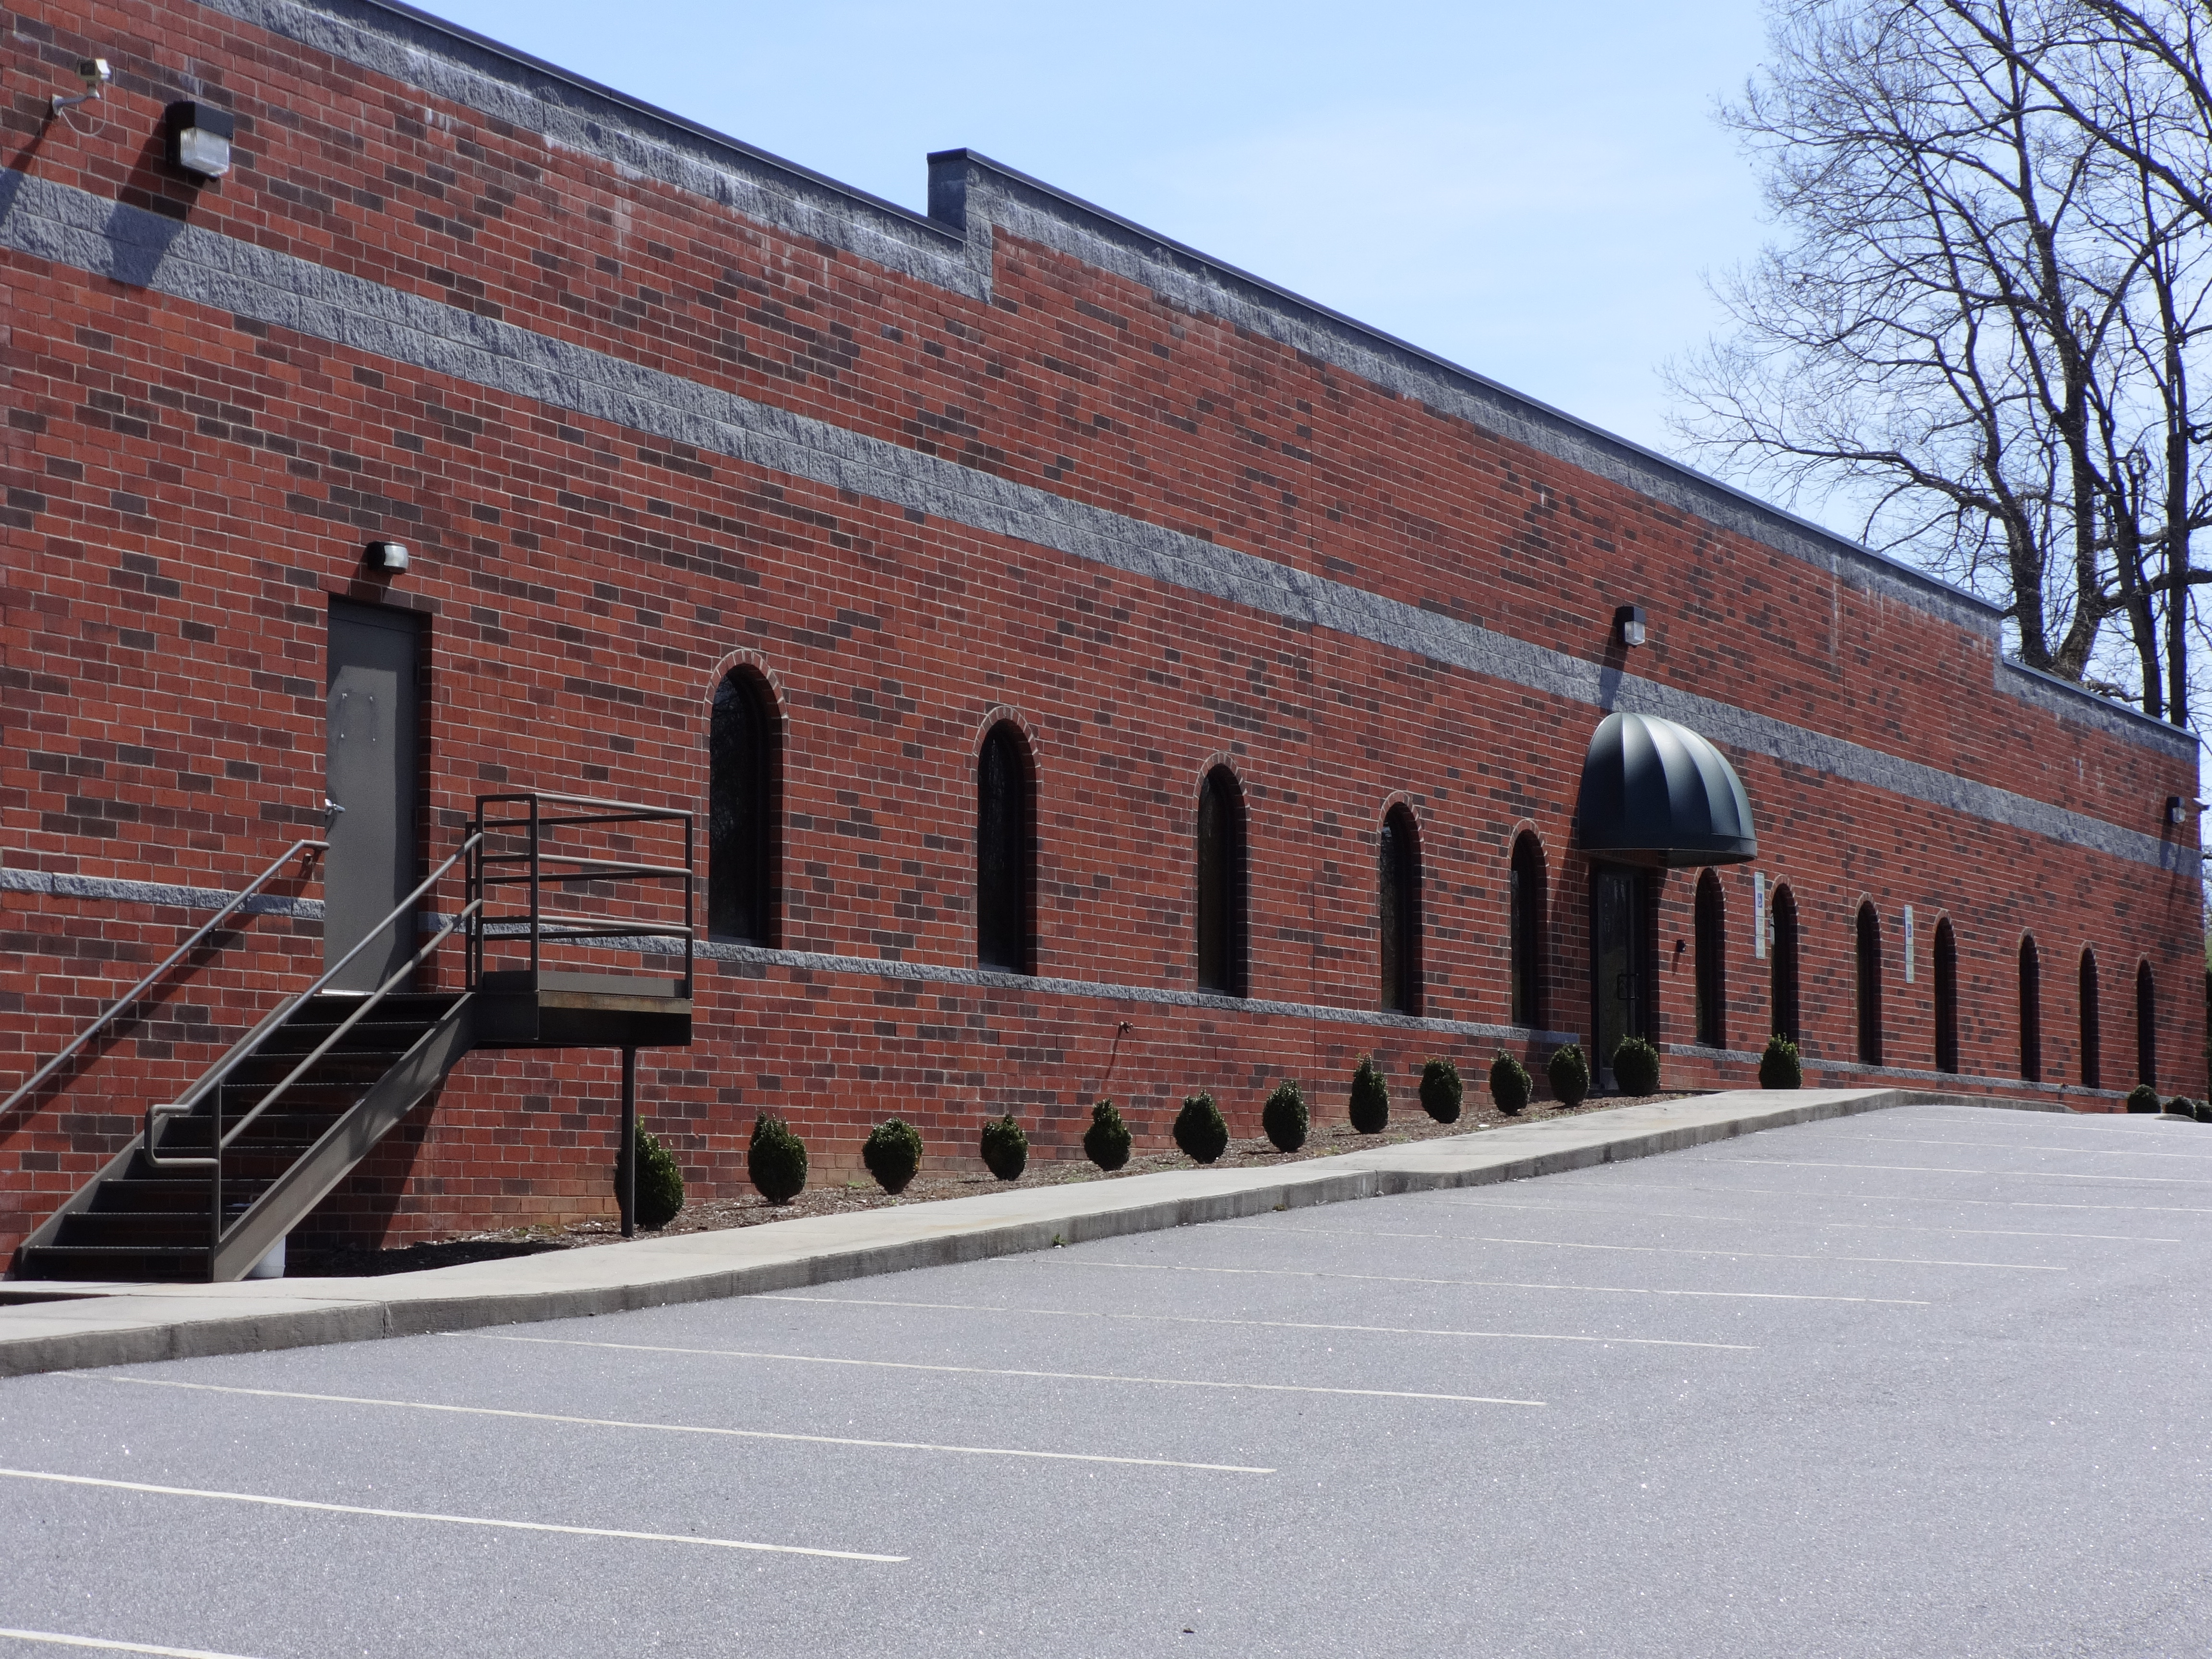 CVCC's Furniture Academy will move to the former Old Hickory Tannery building in Newton.